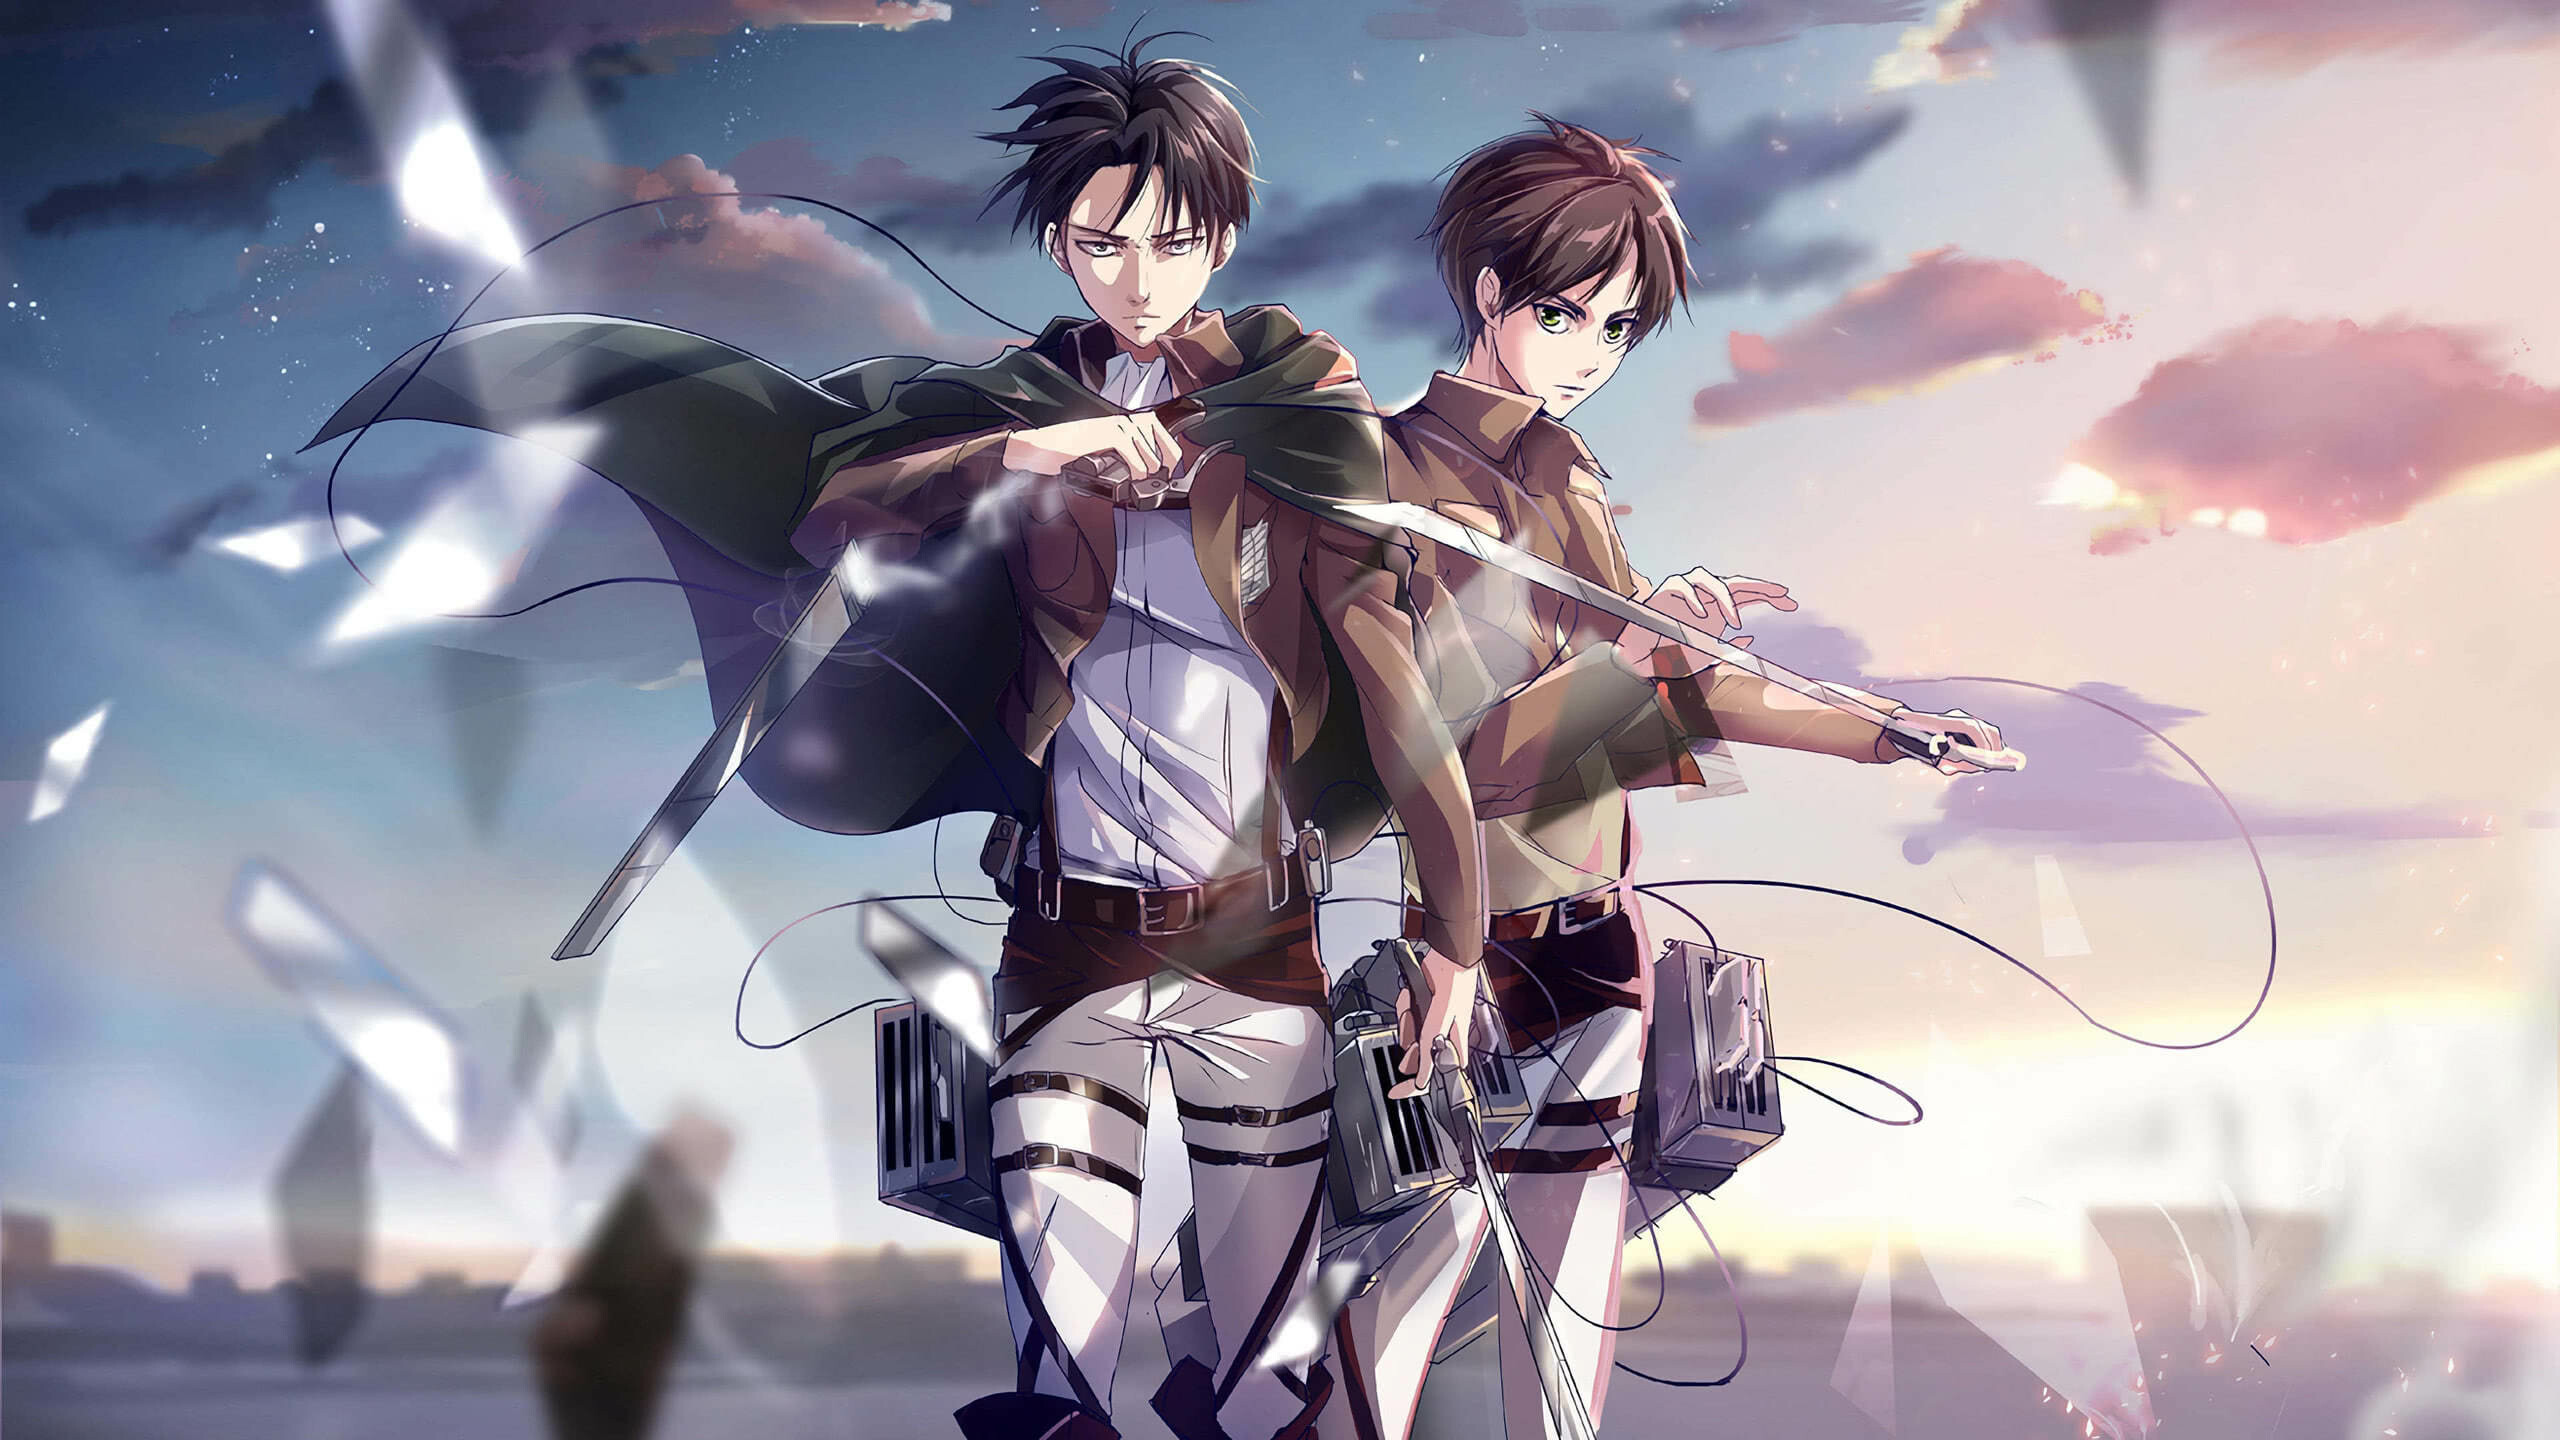 Attack on Titan: The Final Season: "Akuma no Ko" performed by Ai Higuchi is the ending theme for Part 2. 2560x1440 HD Background.